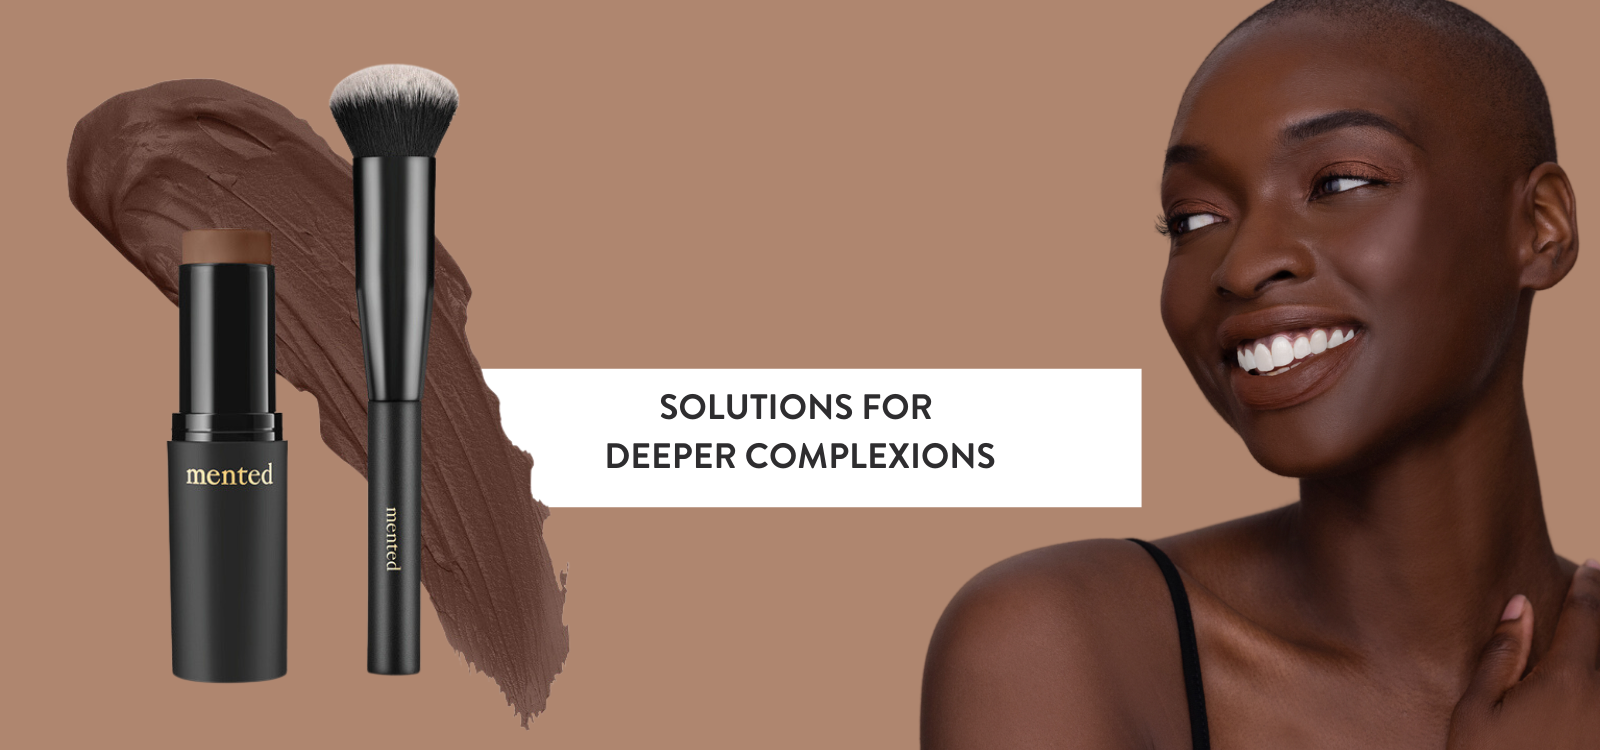 Solutions for Deeper Complexions